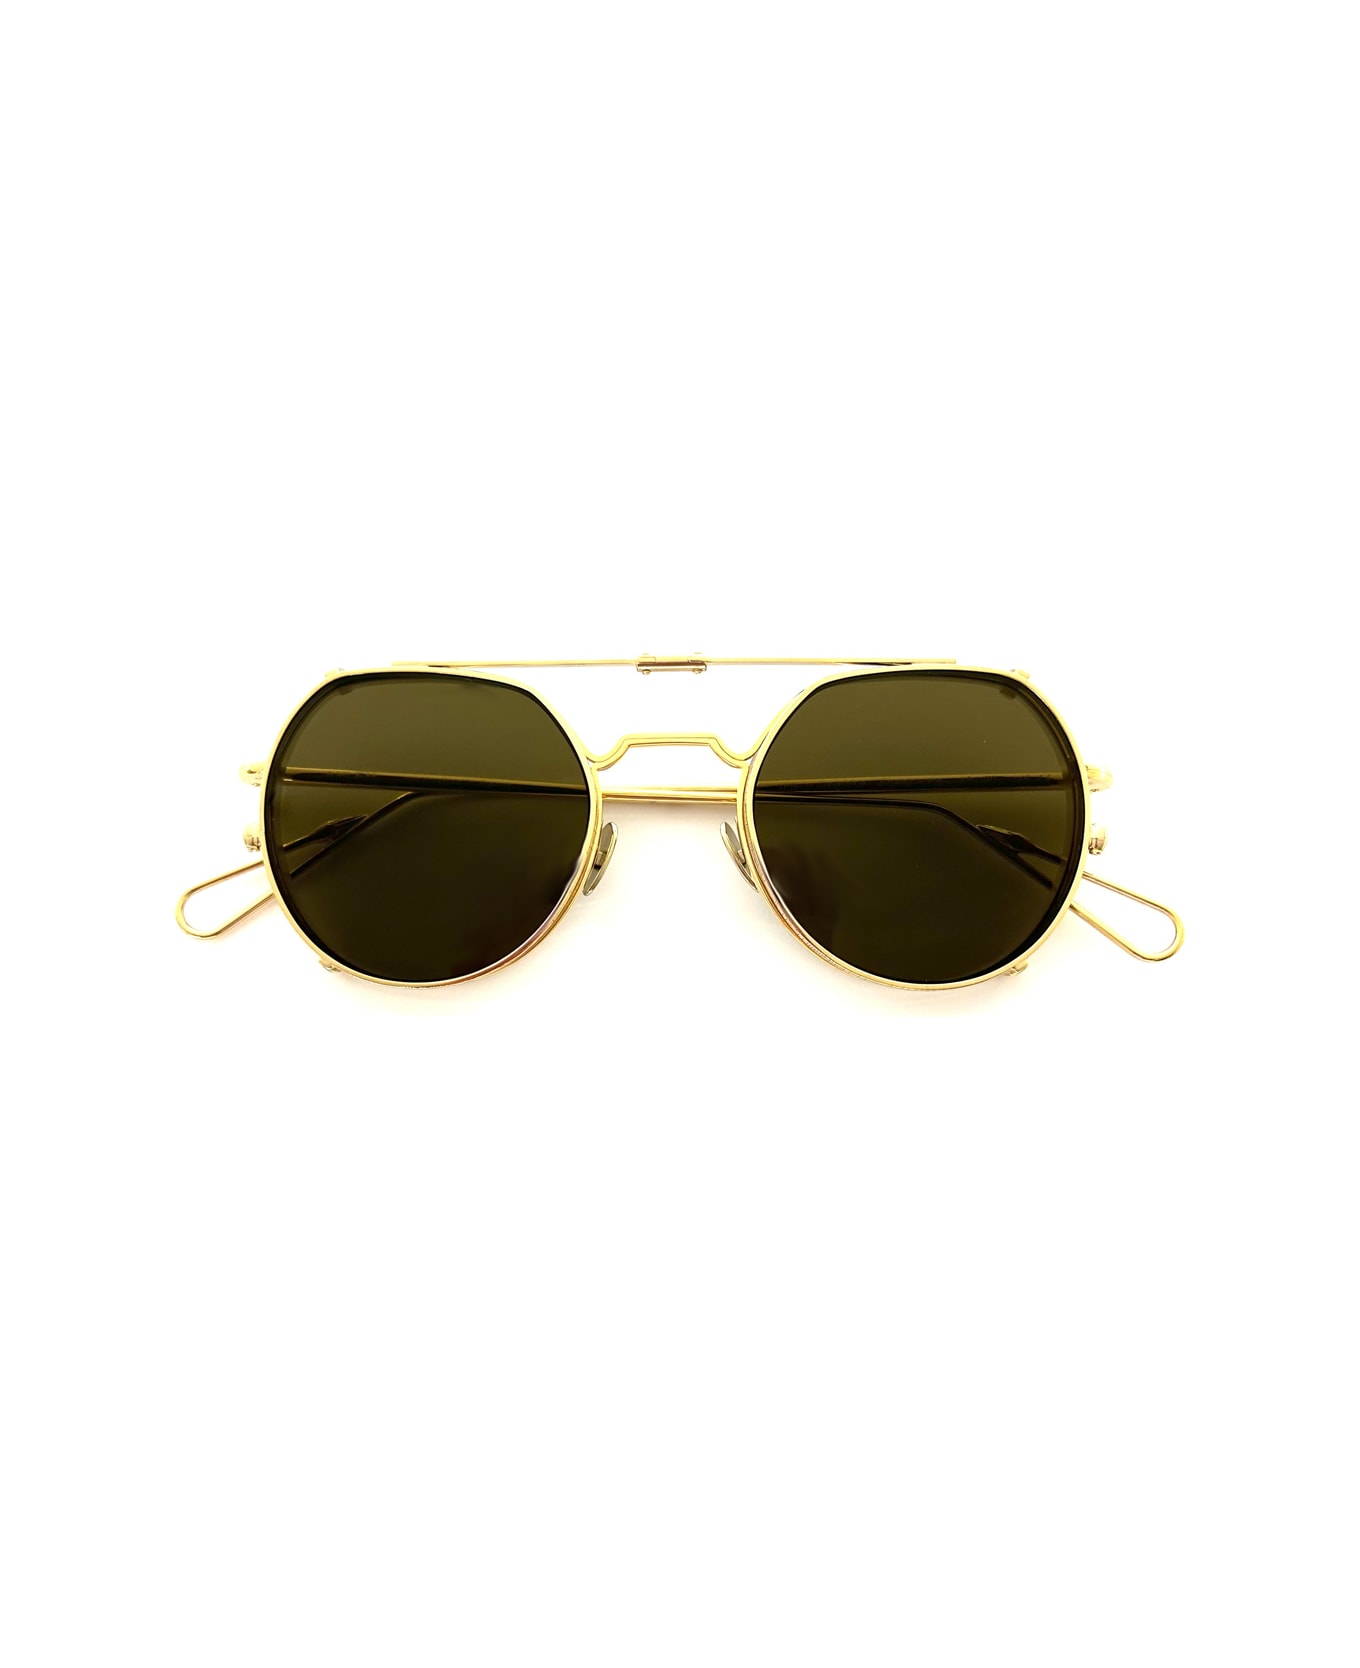 AHLEM Place Dauphine Clip Champagne Sunglasses - Oro サングラス